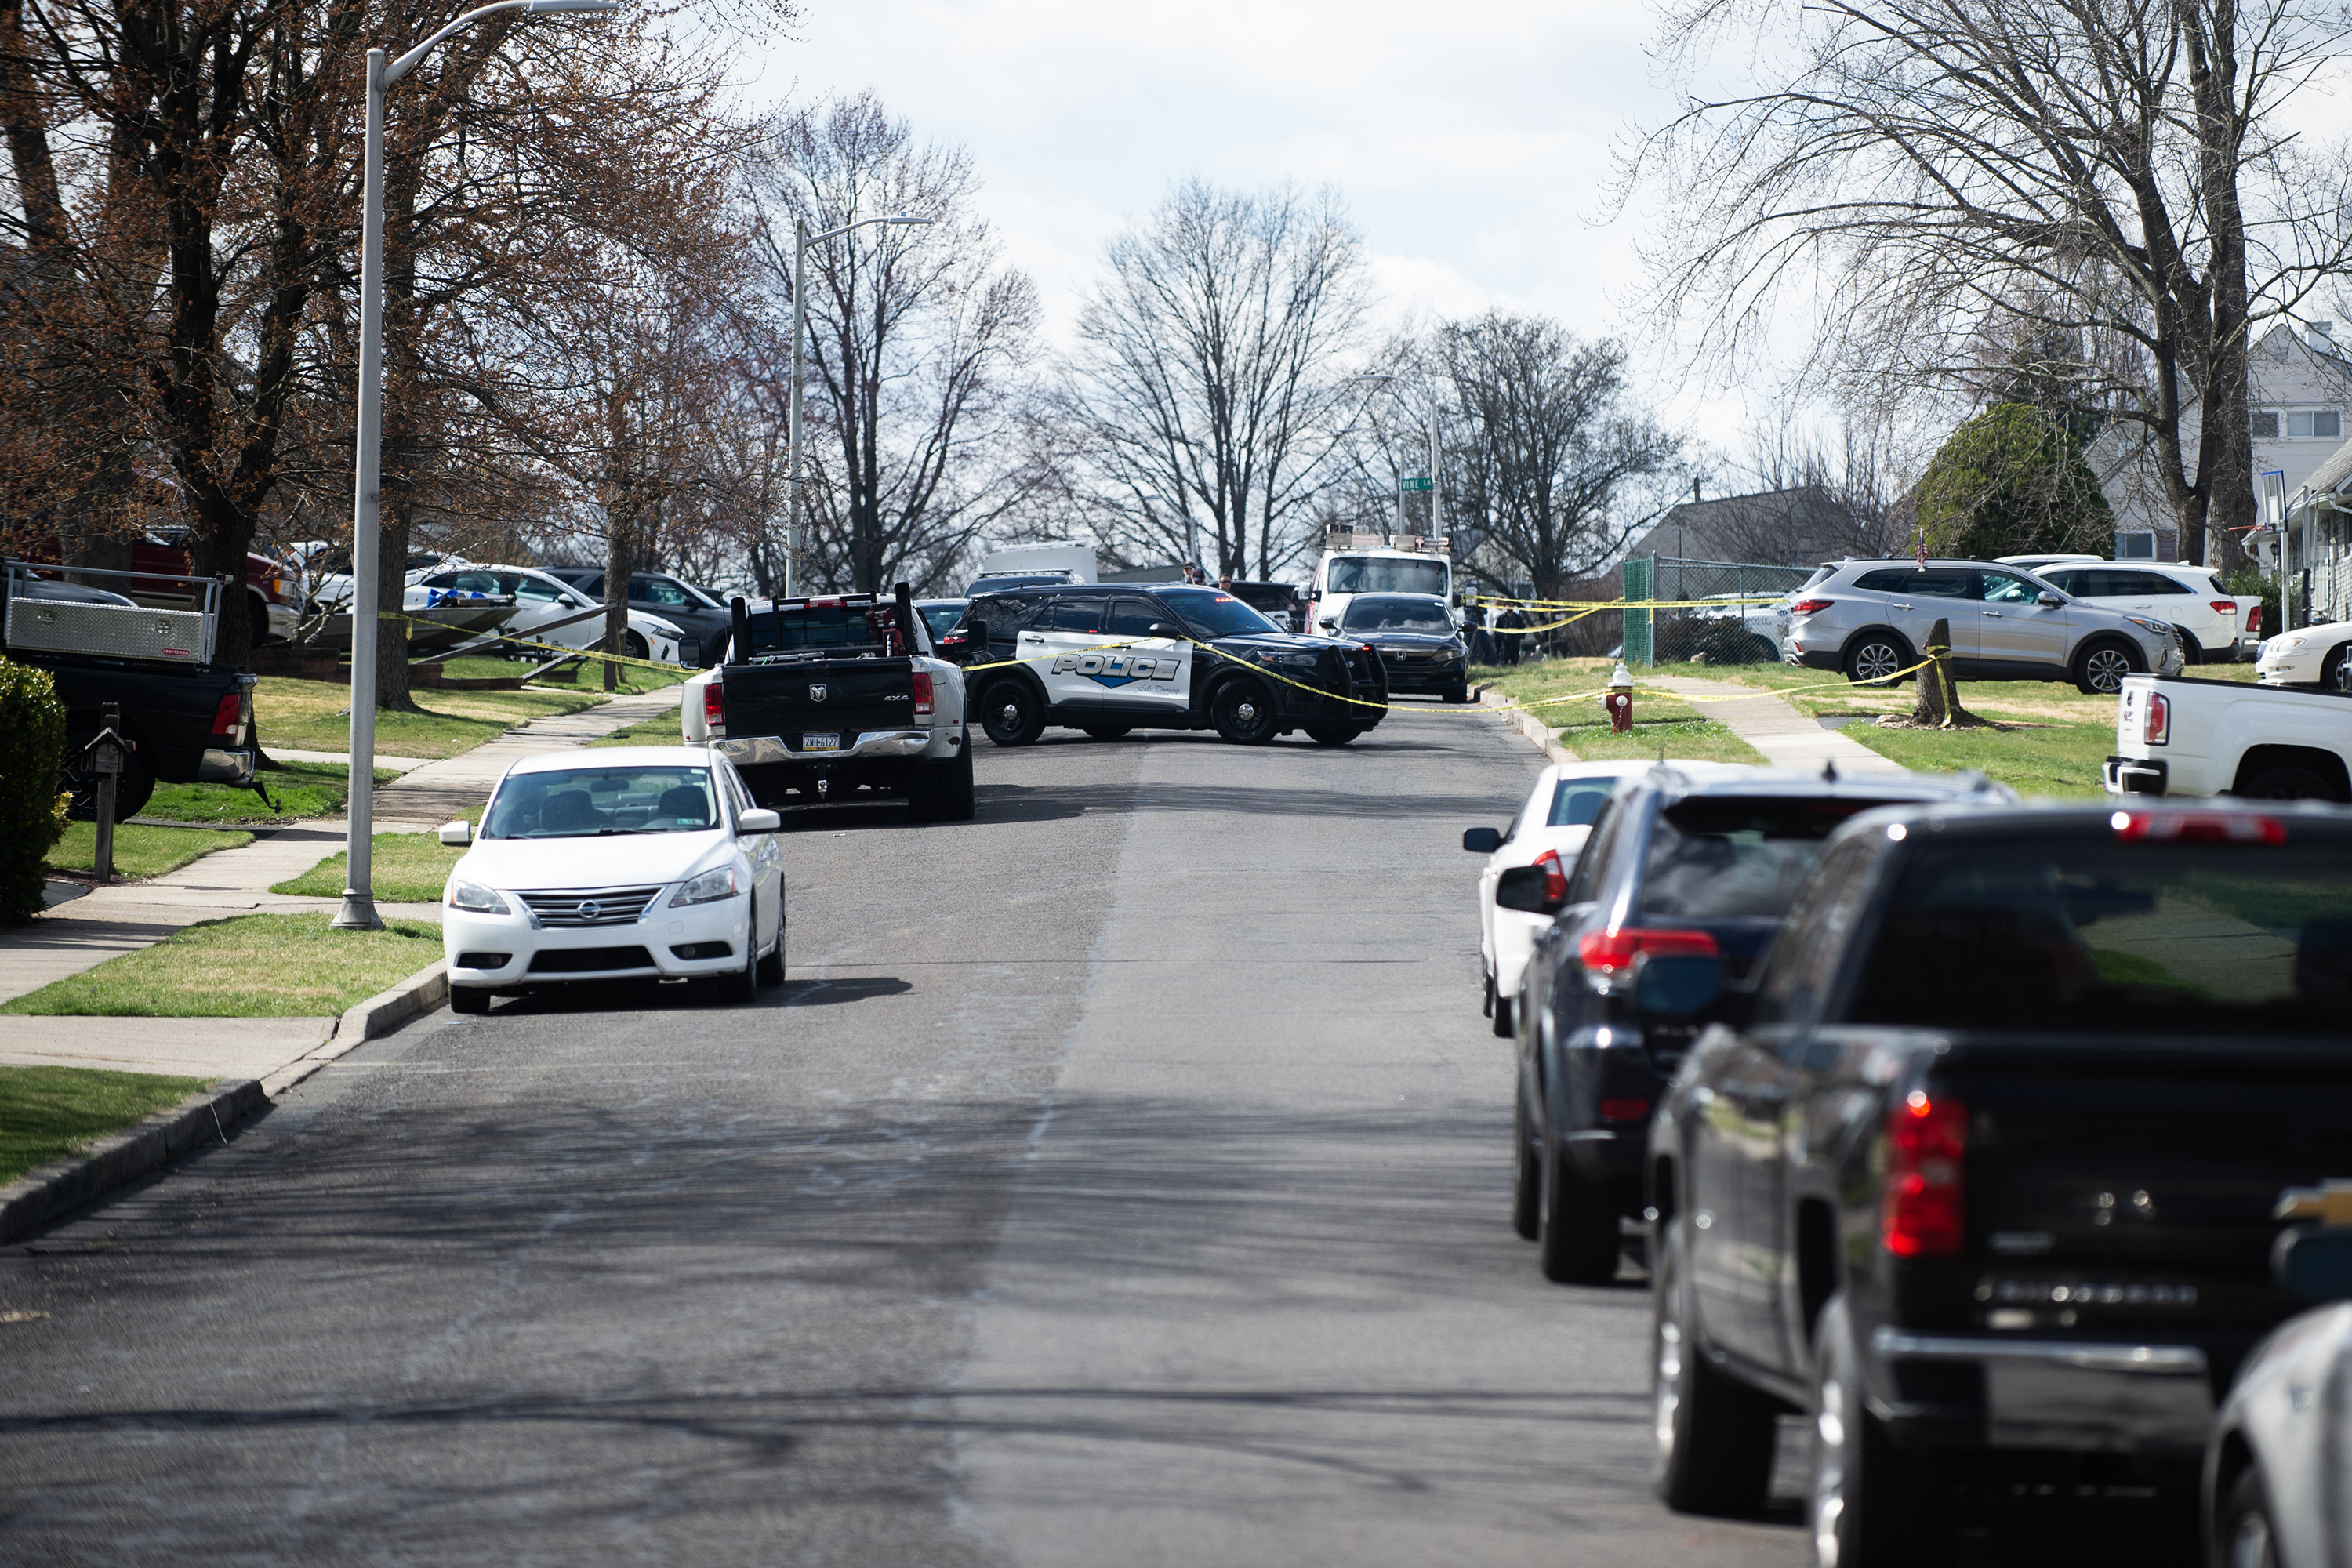 Police officers from the Falls Township Police Department tape off and inspect the scene after a suspect shot and killed three people in Levittown, Pennsylvania, on March 16.